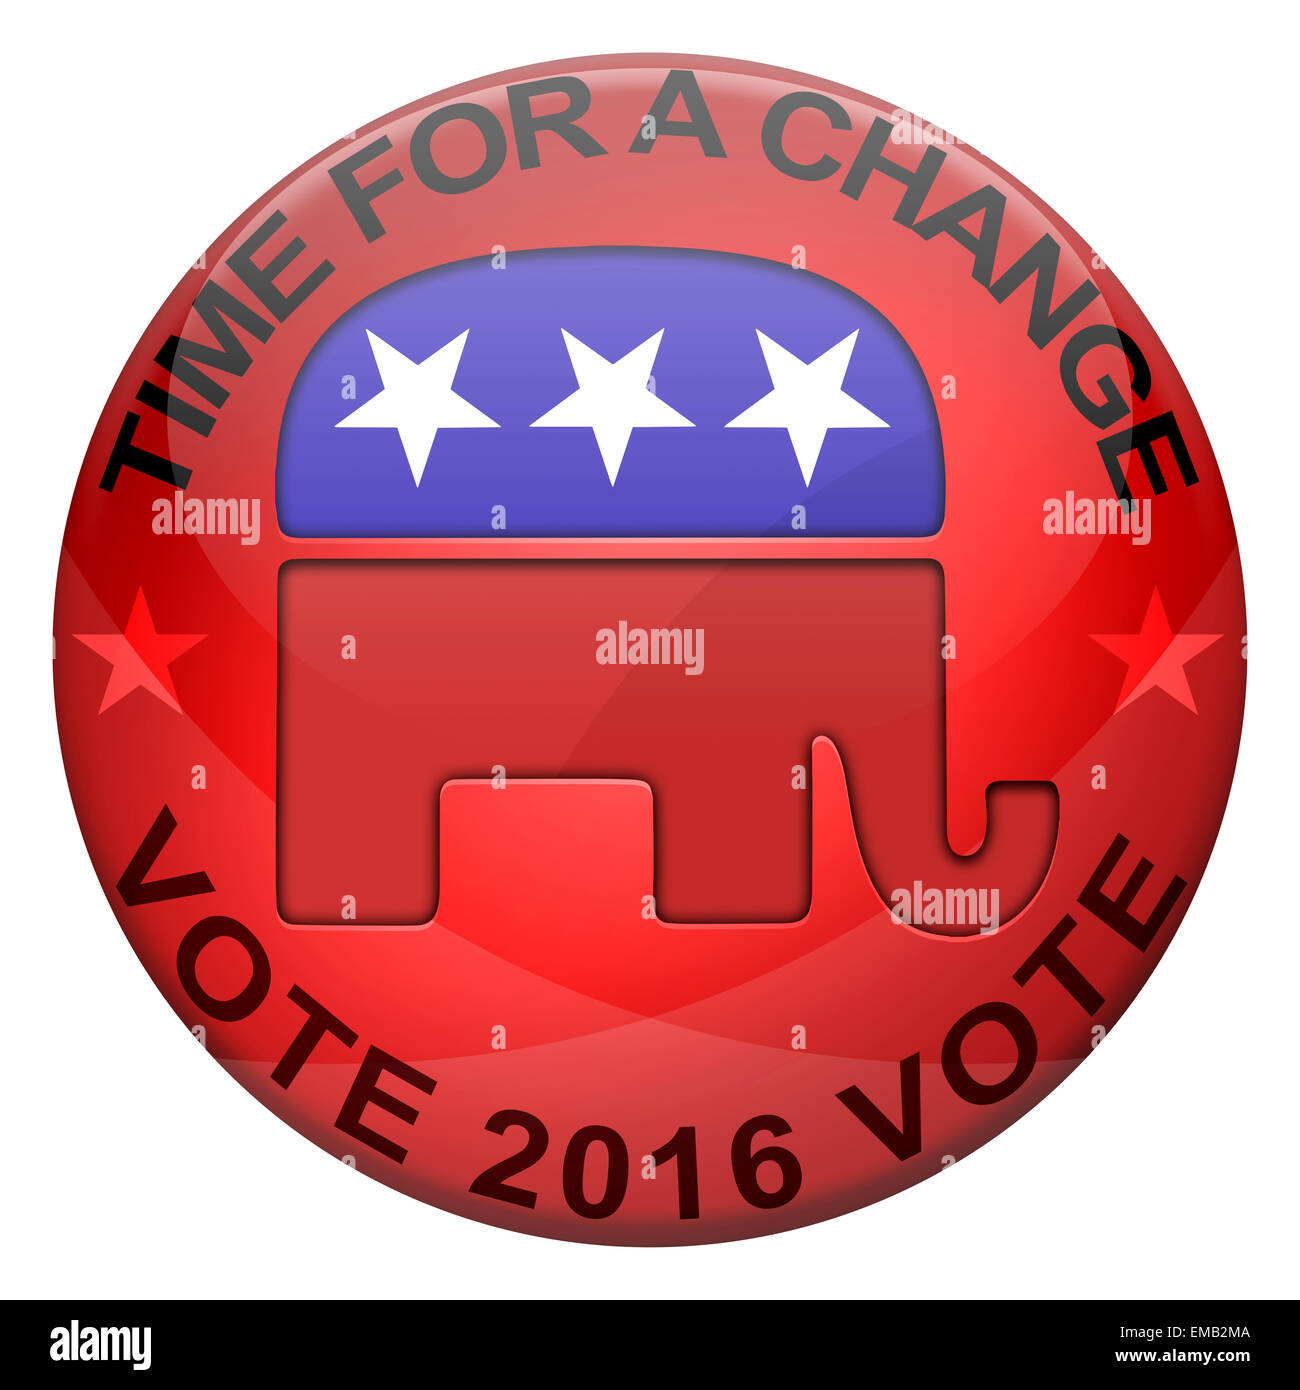 Elections button shape with Republican party icon Stock Photo